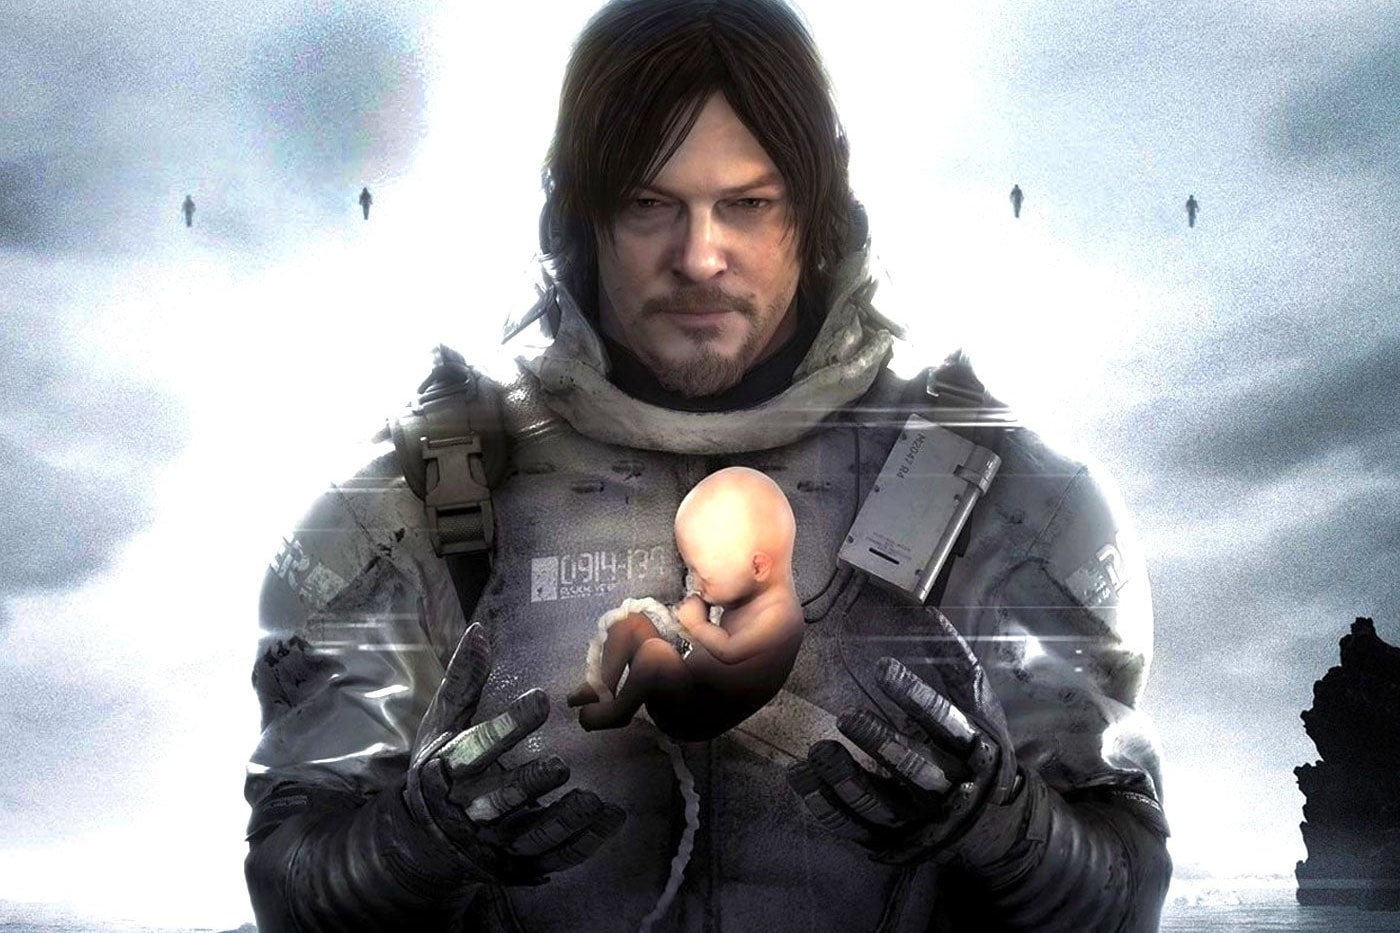 Hideo Kojima partners with A24 for Death Stranding film